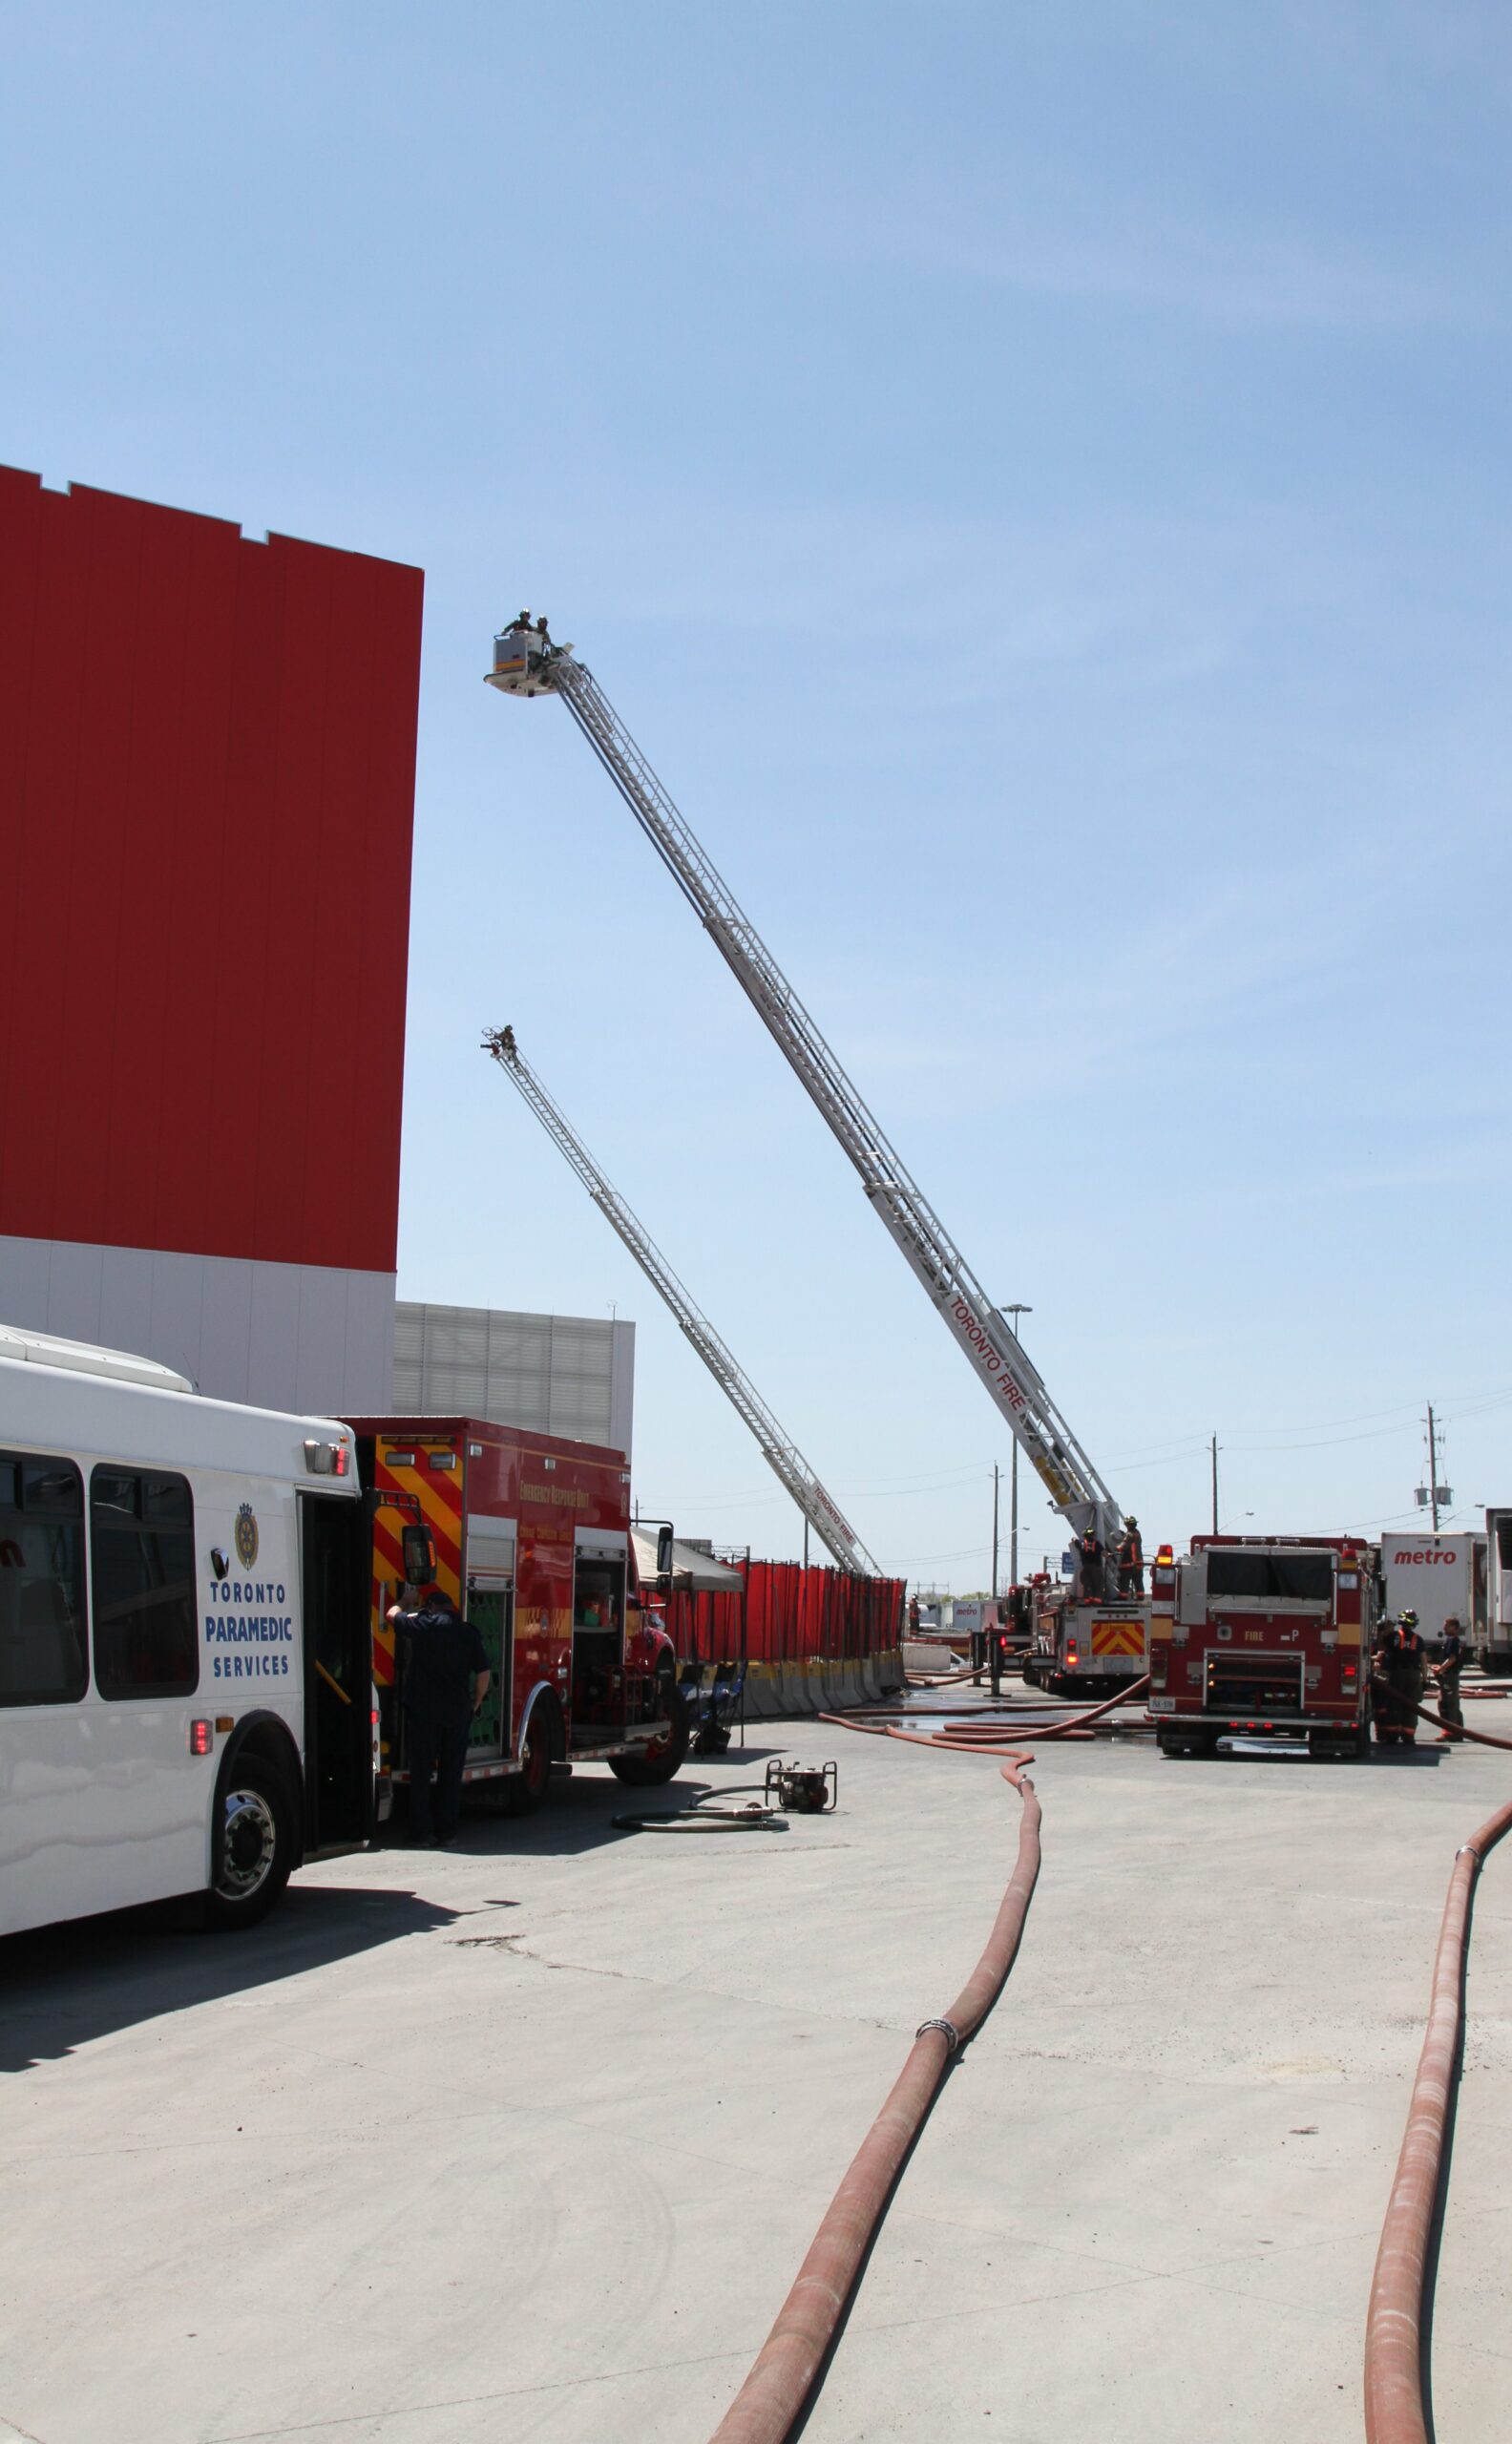 Toronto Fire responded to reports of a roof